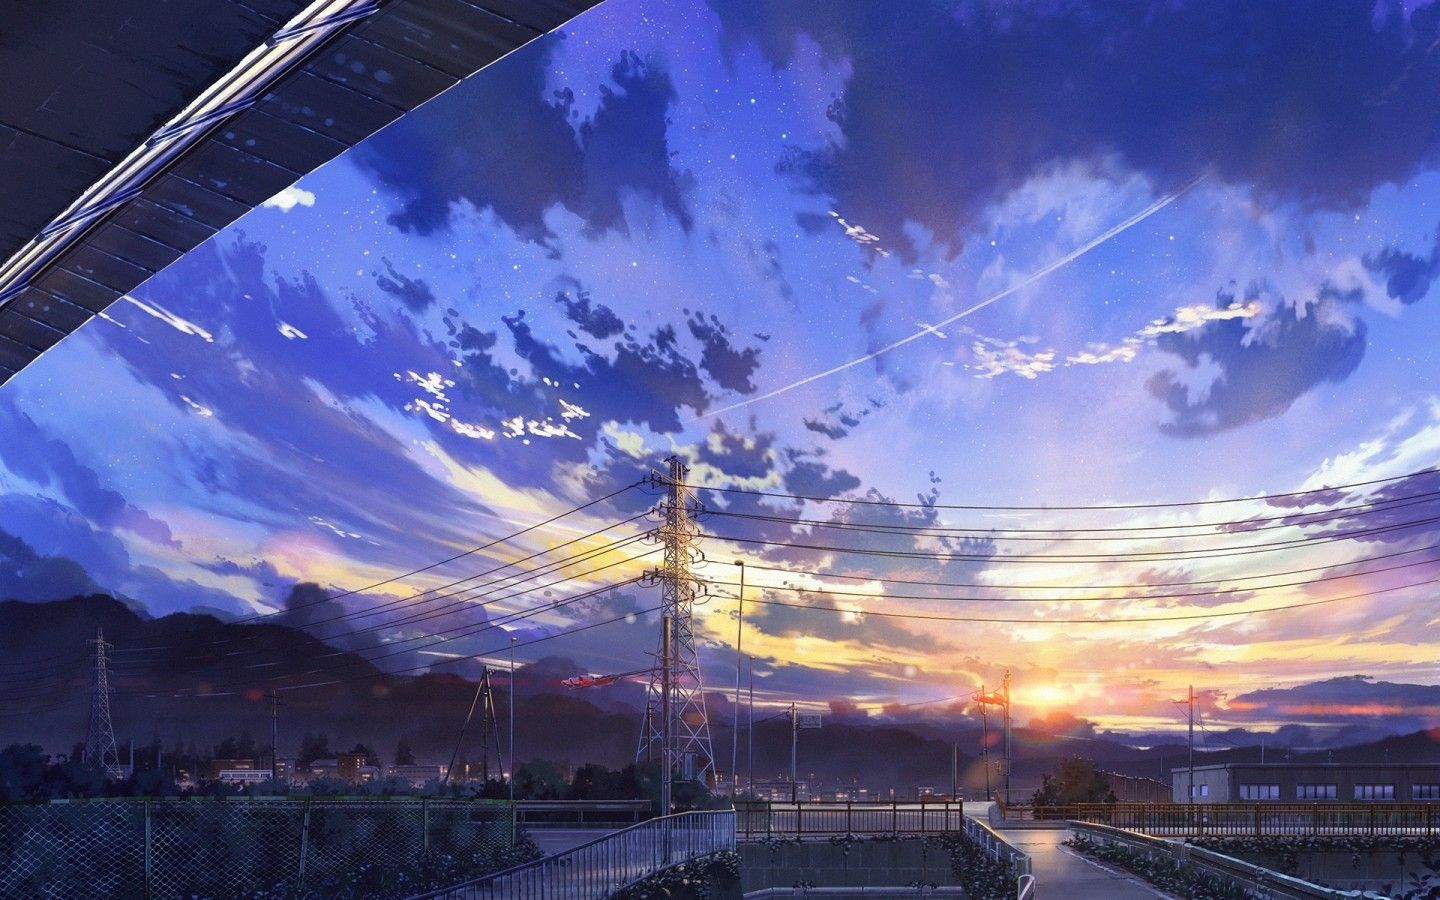 Download 1440x900 Anime Landscape, Scenery, Clouds, Stars